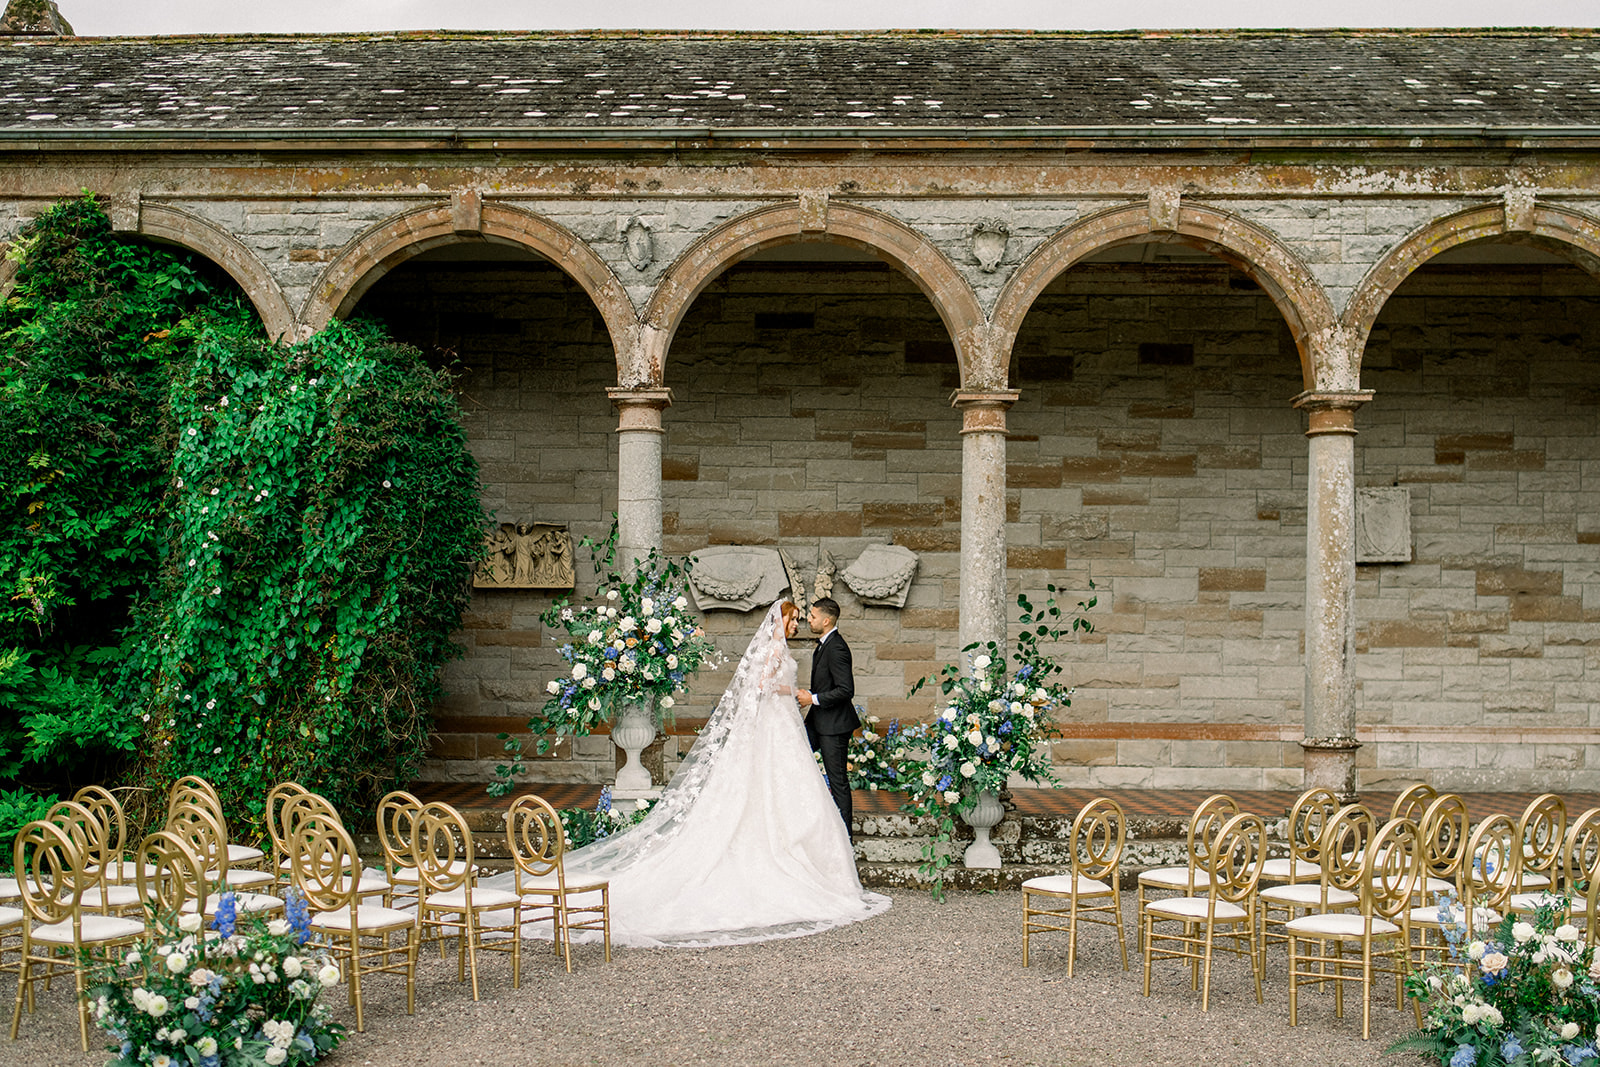 The bride and groom share a tender moment under a stone-arched ceremony at Castle Leslie, Ireland.